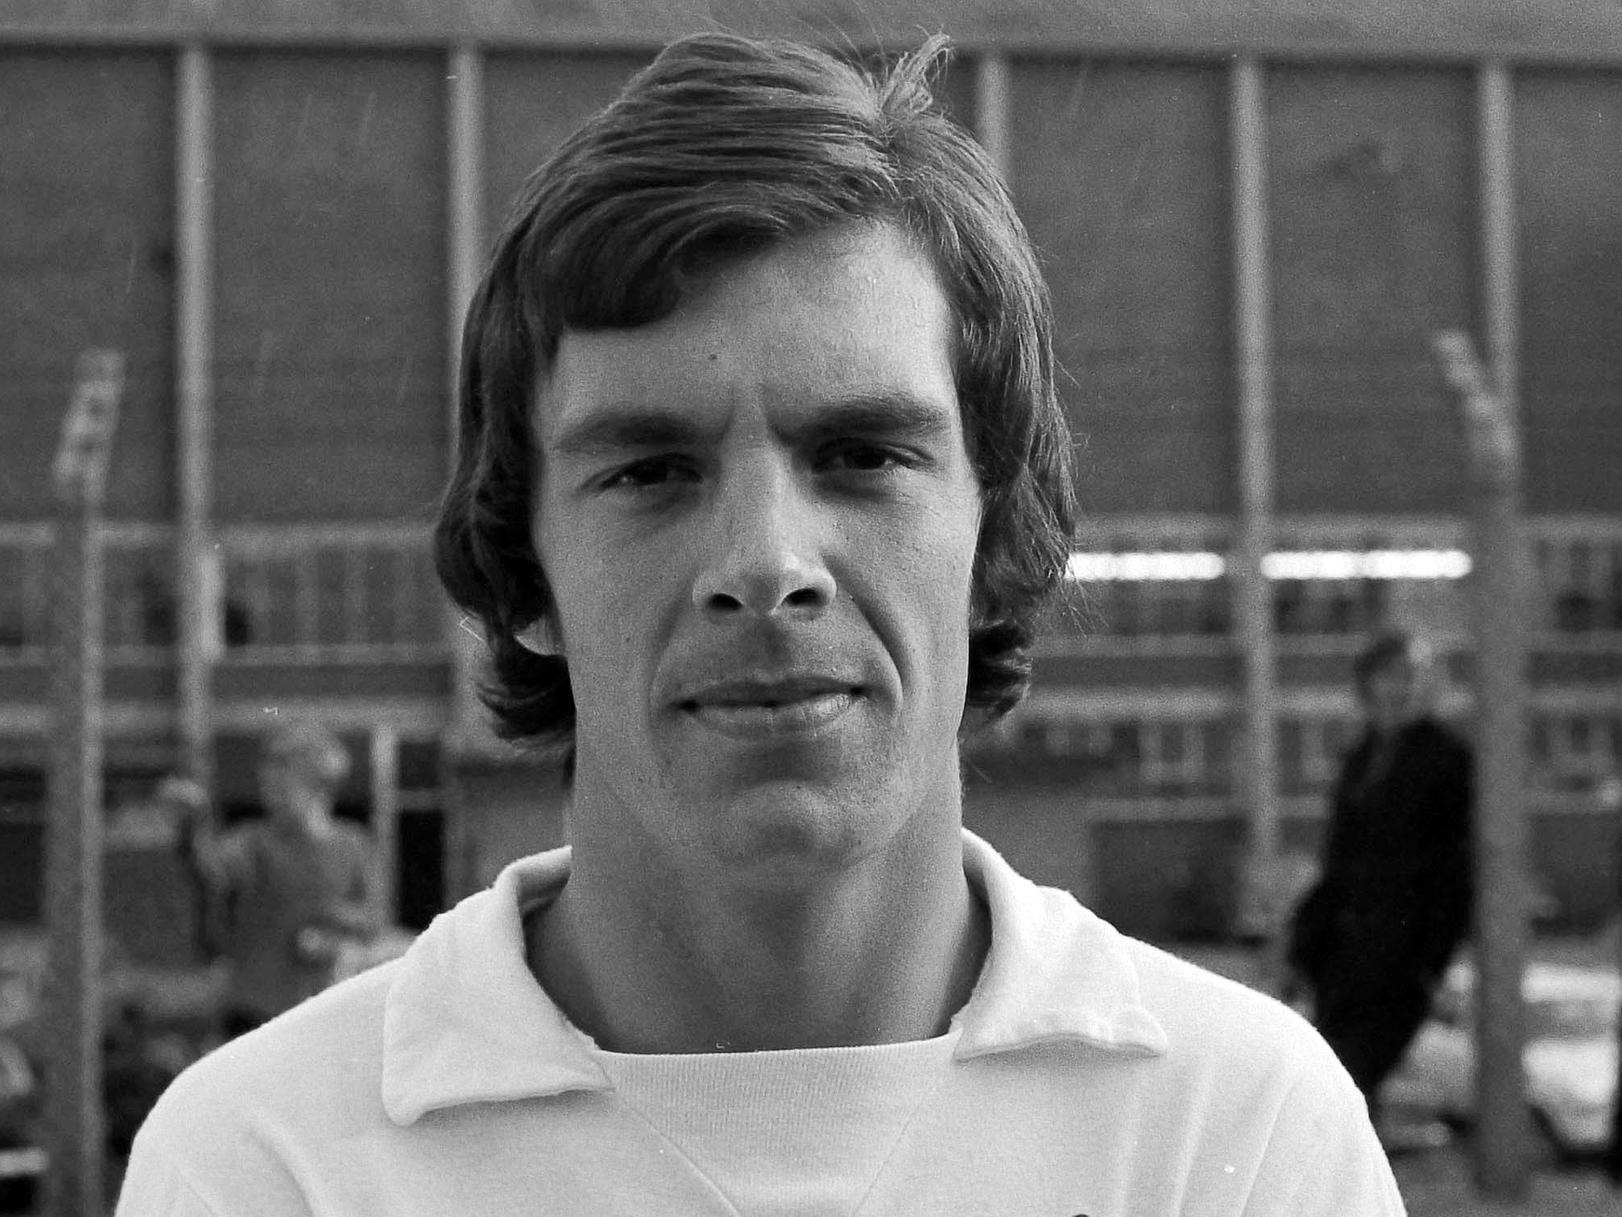 Part of the successful Leeds United team of the 1970s he scored 39 league goals from 135 league games.